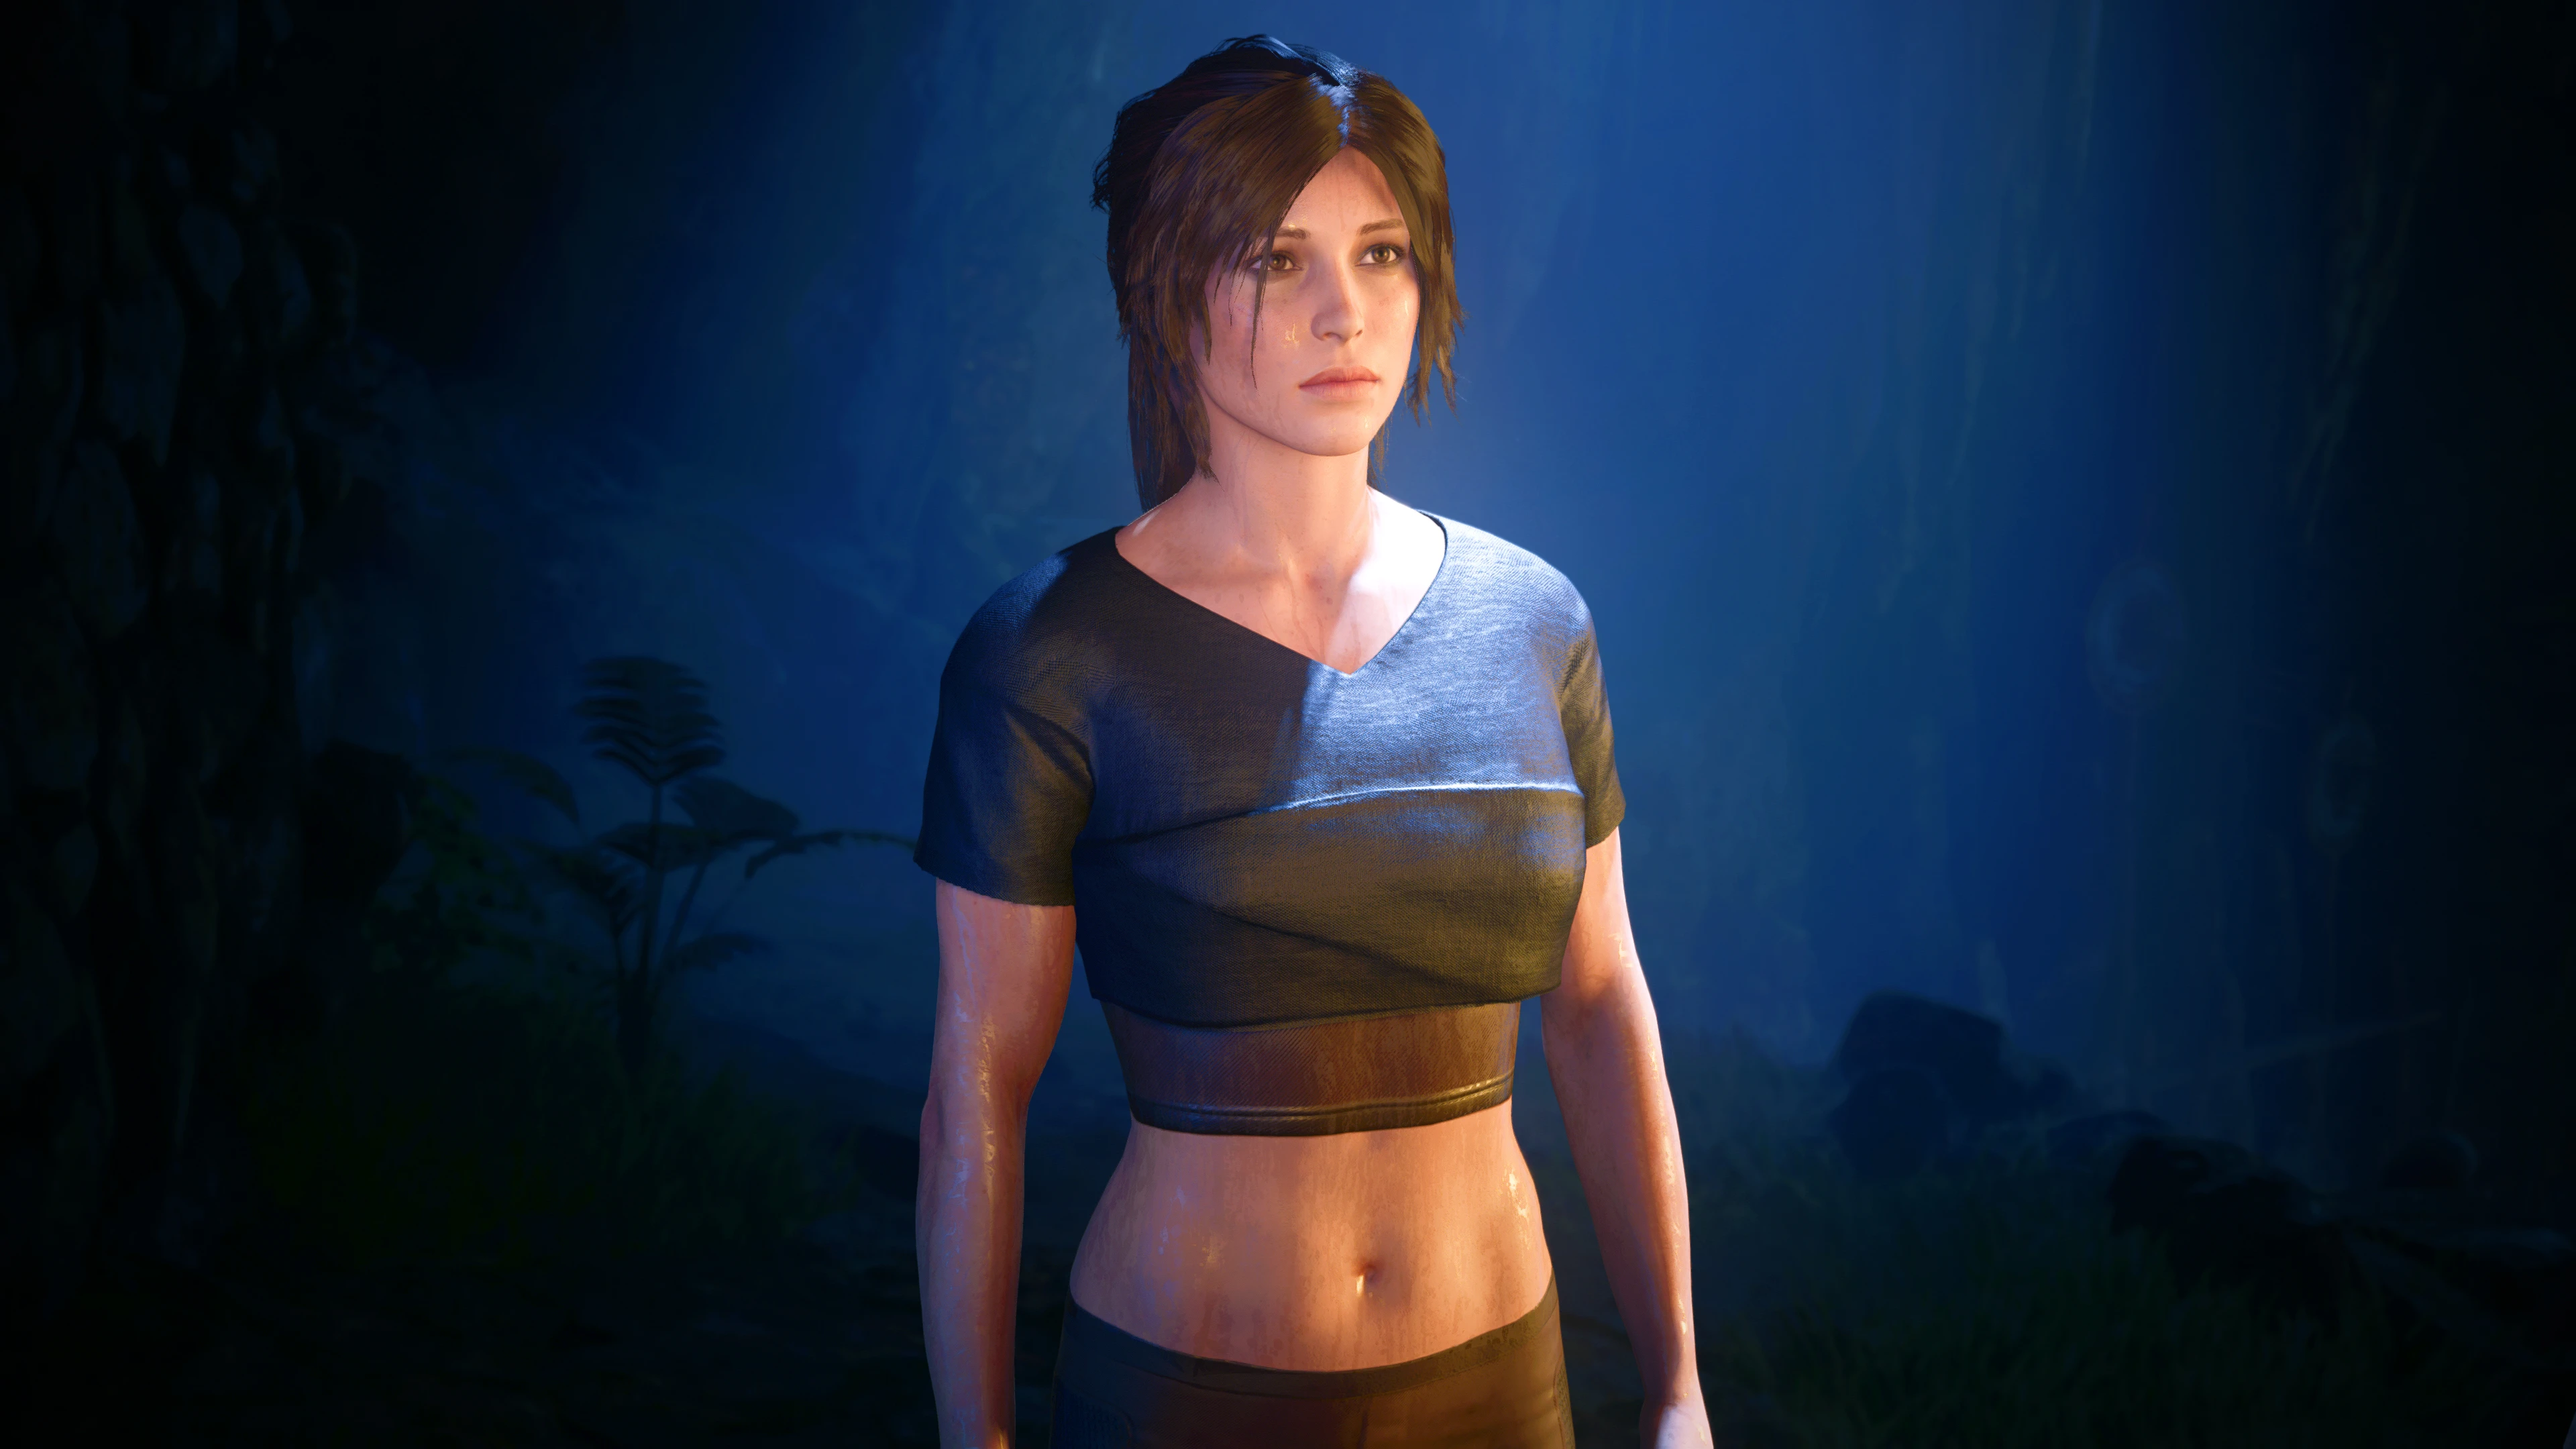 Nude Mod Released For Shadow of the Tomb Raider | eTeknix